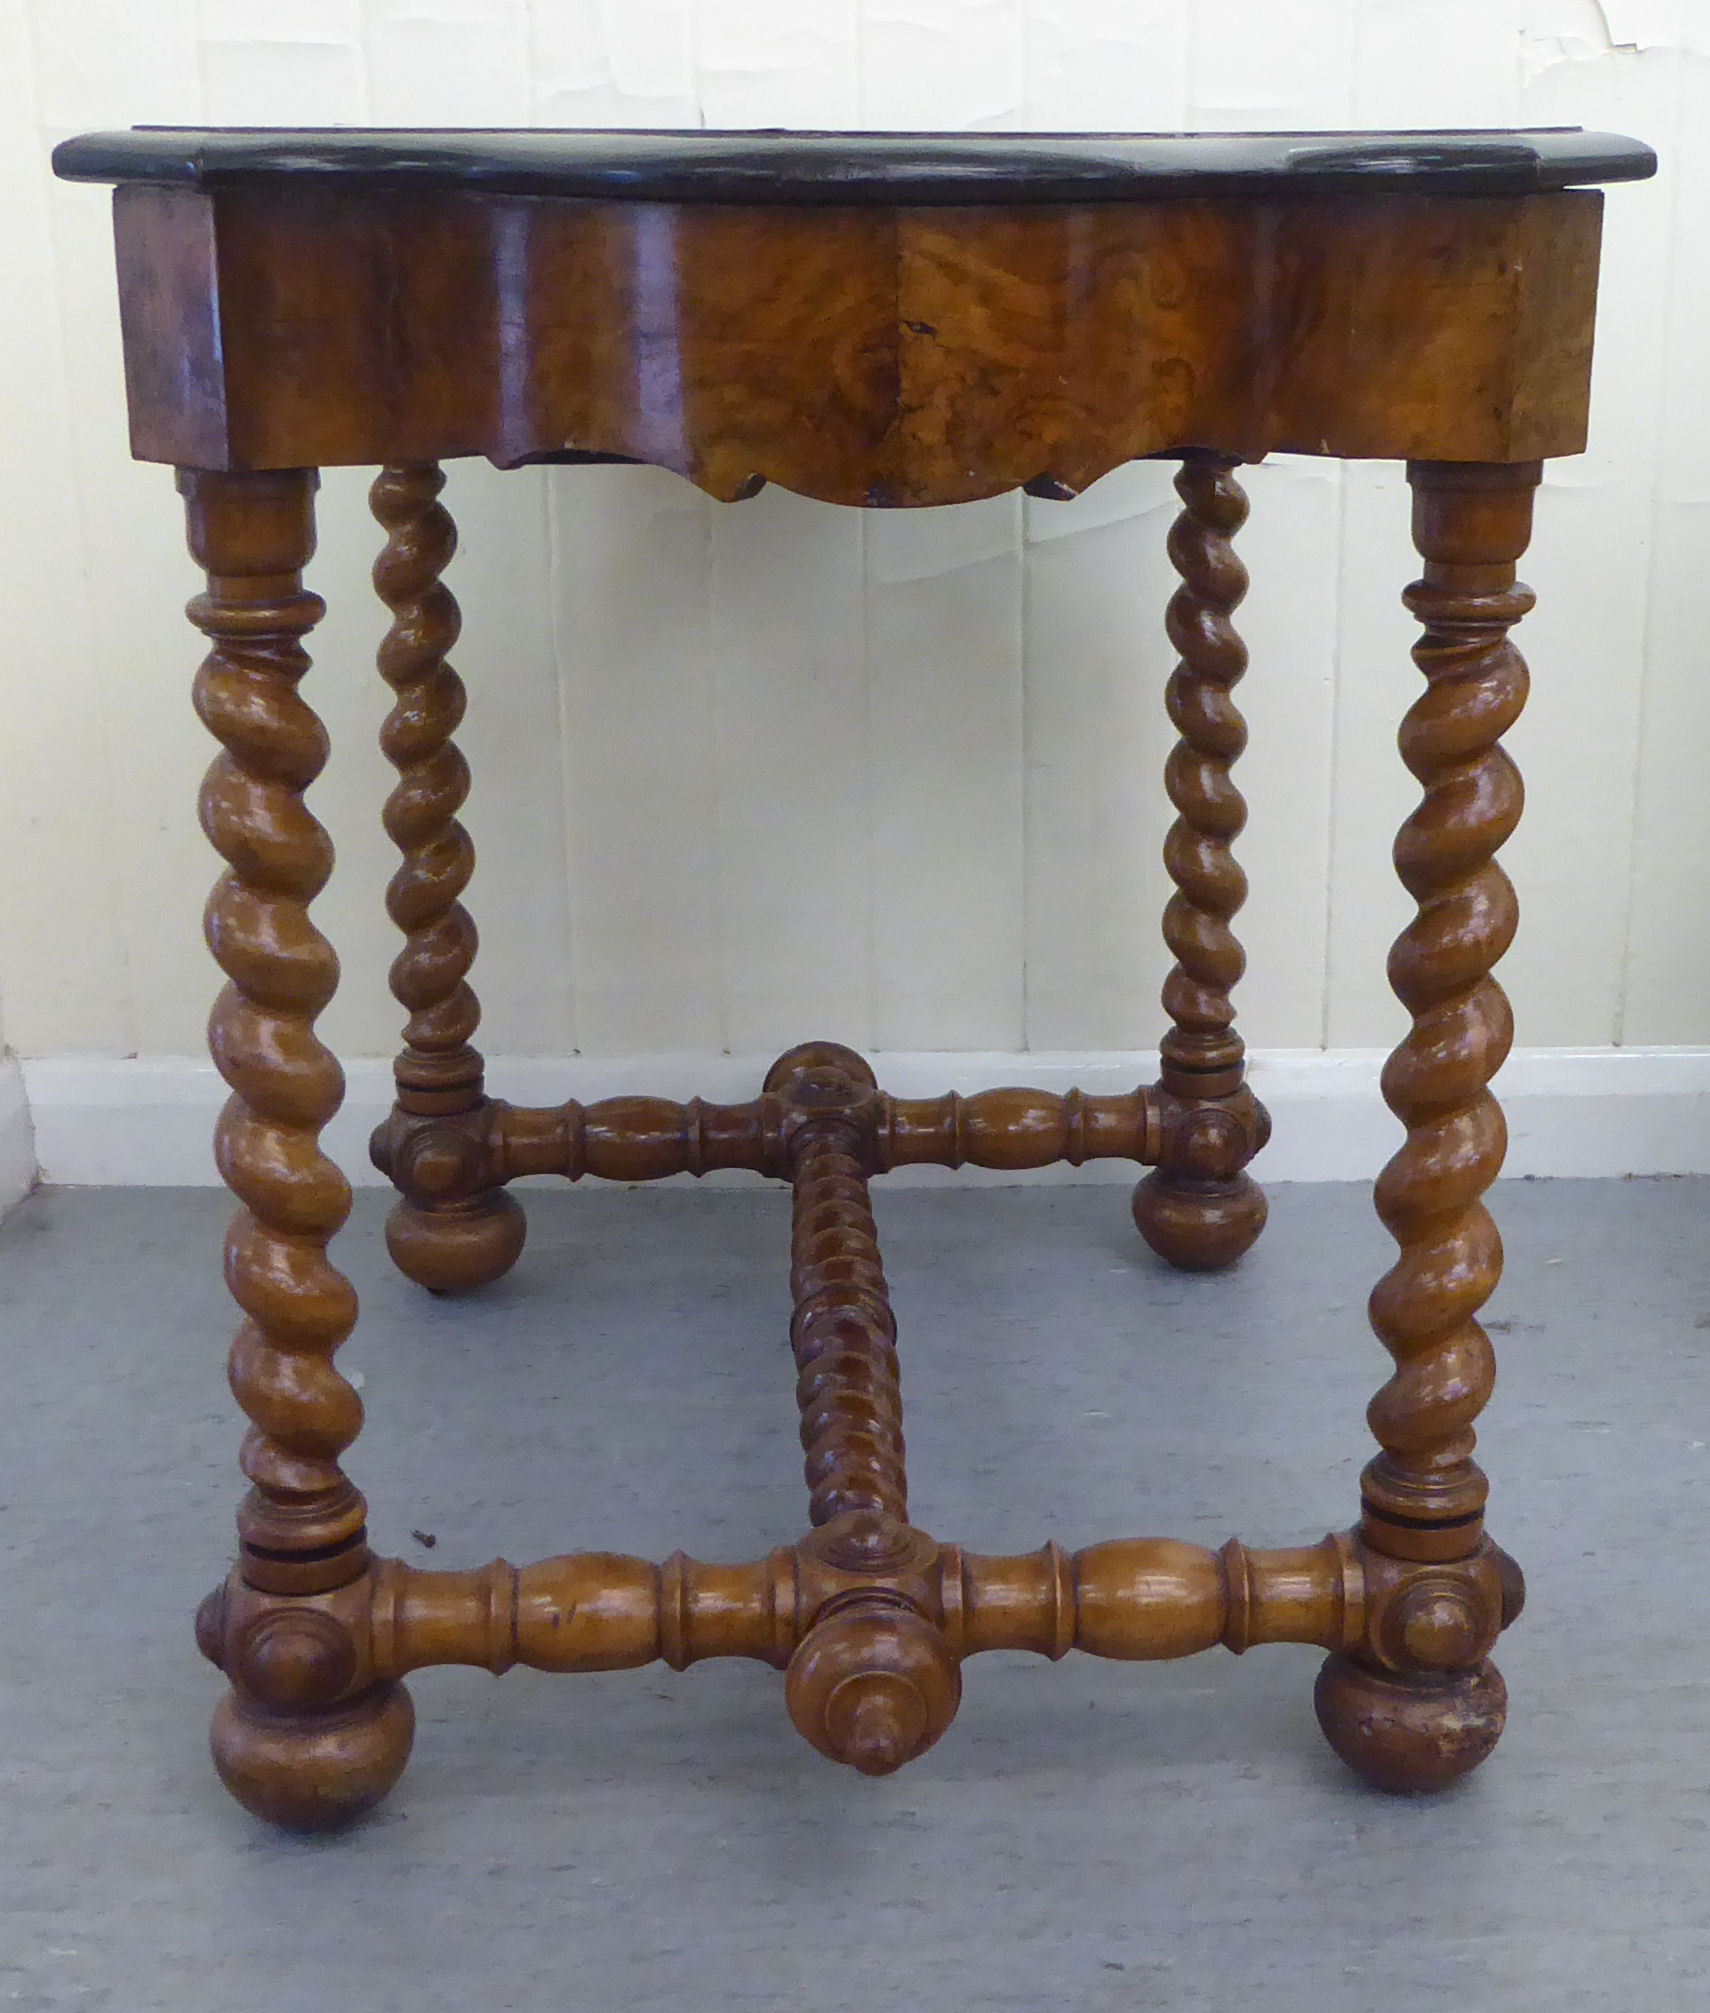 A late 19thC Continental figured walnut and floral marquetry games table with a serpentine - Bild 7 aus 12